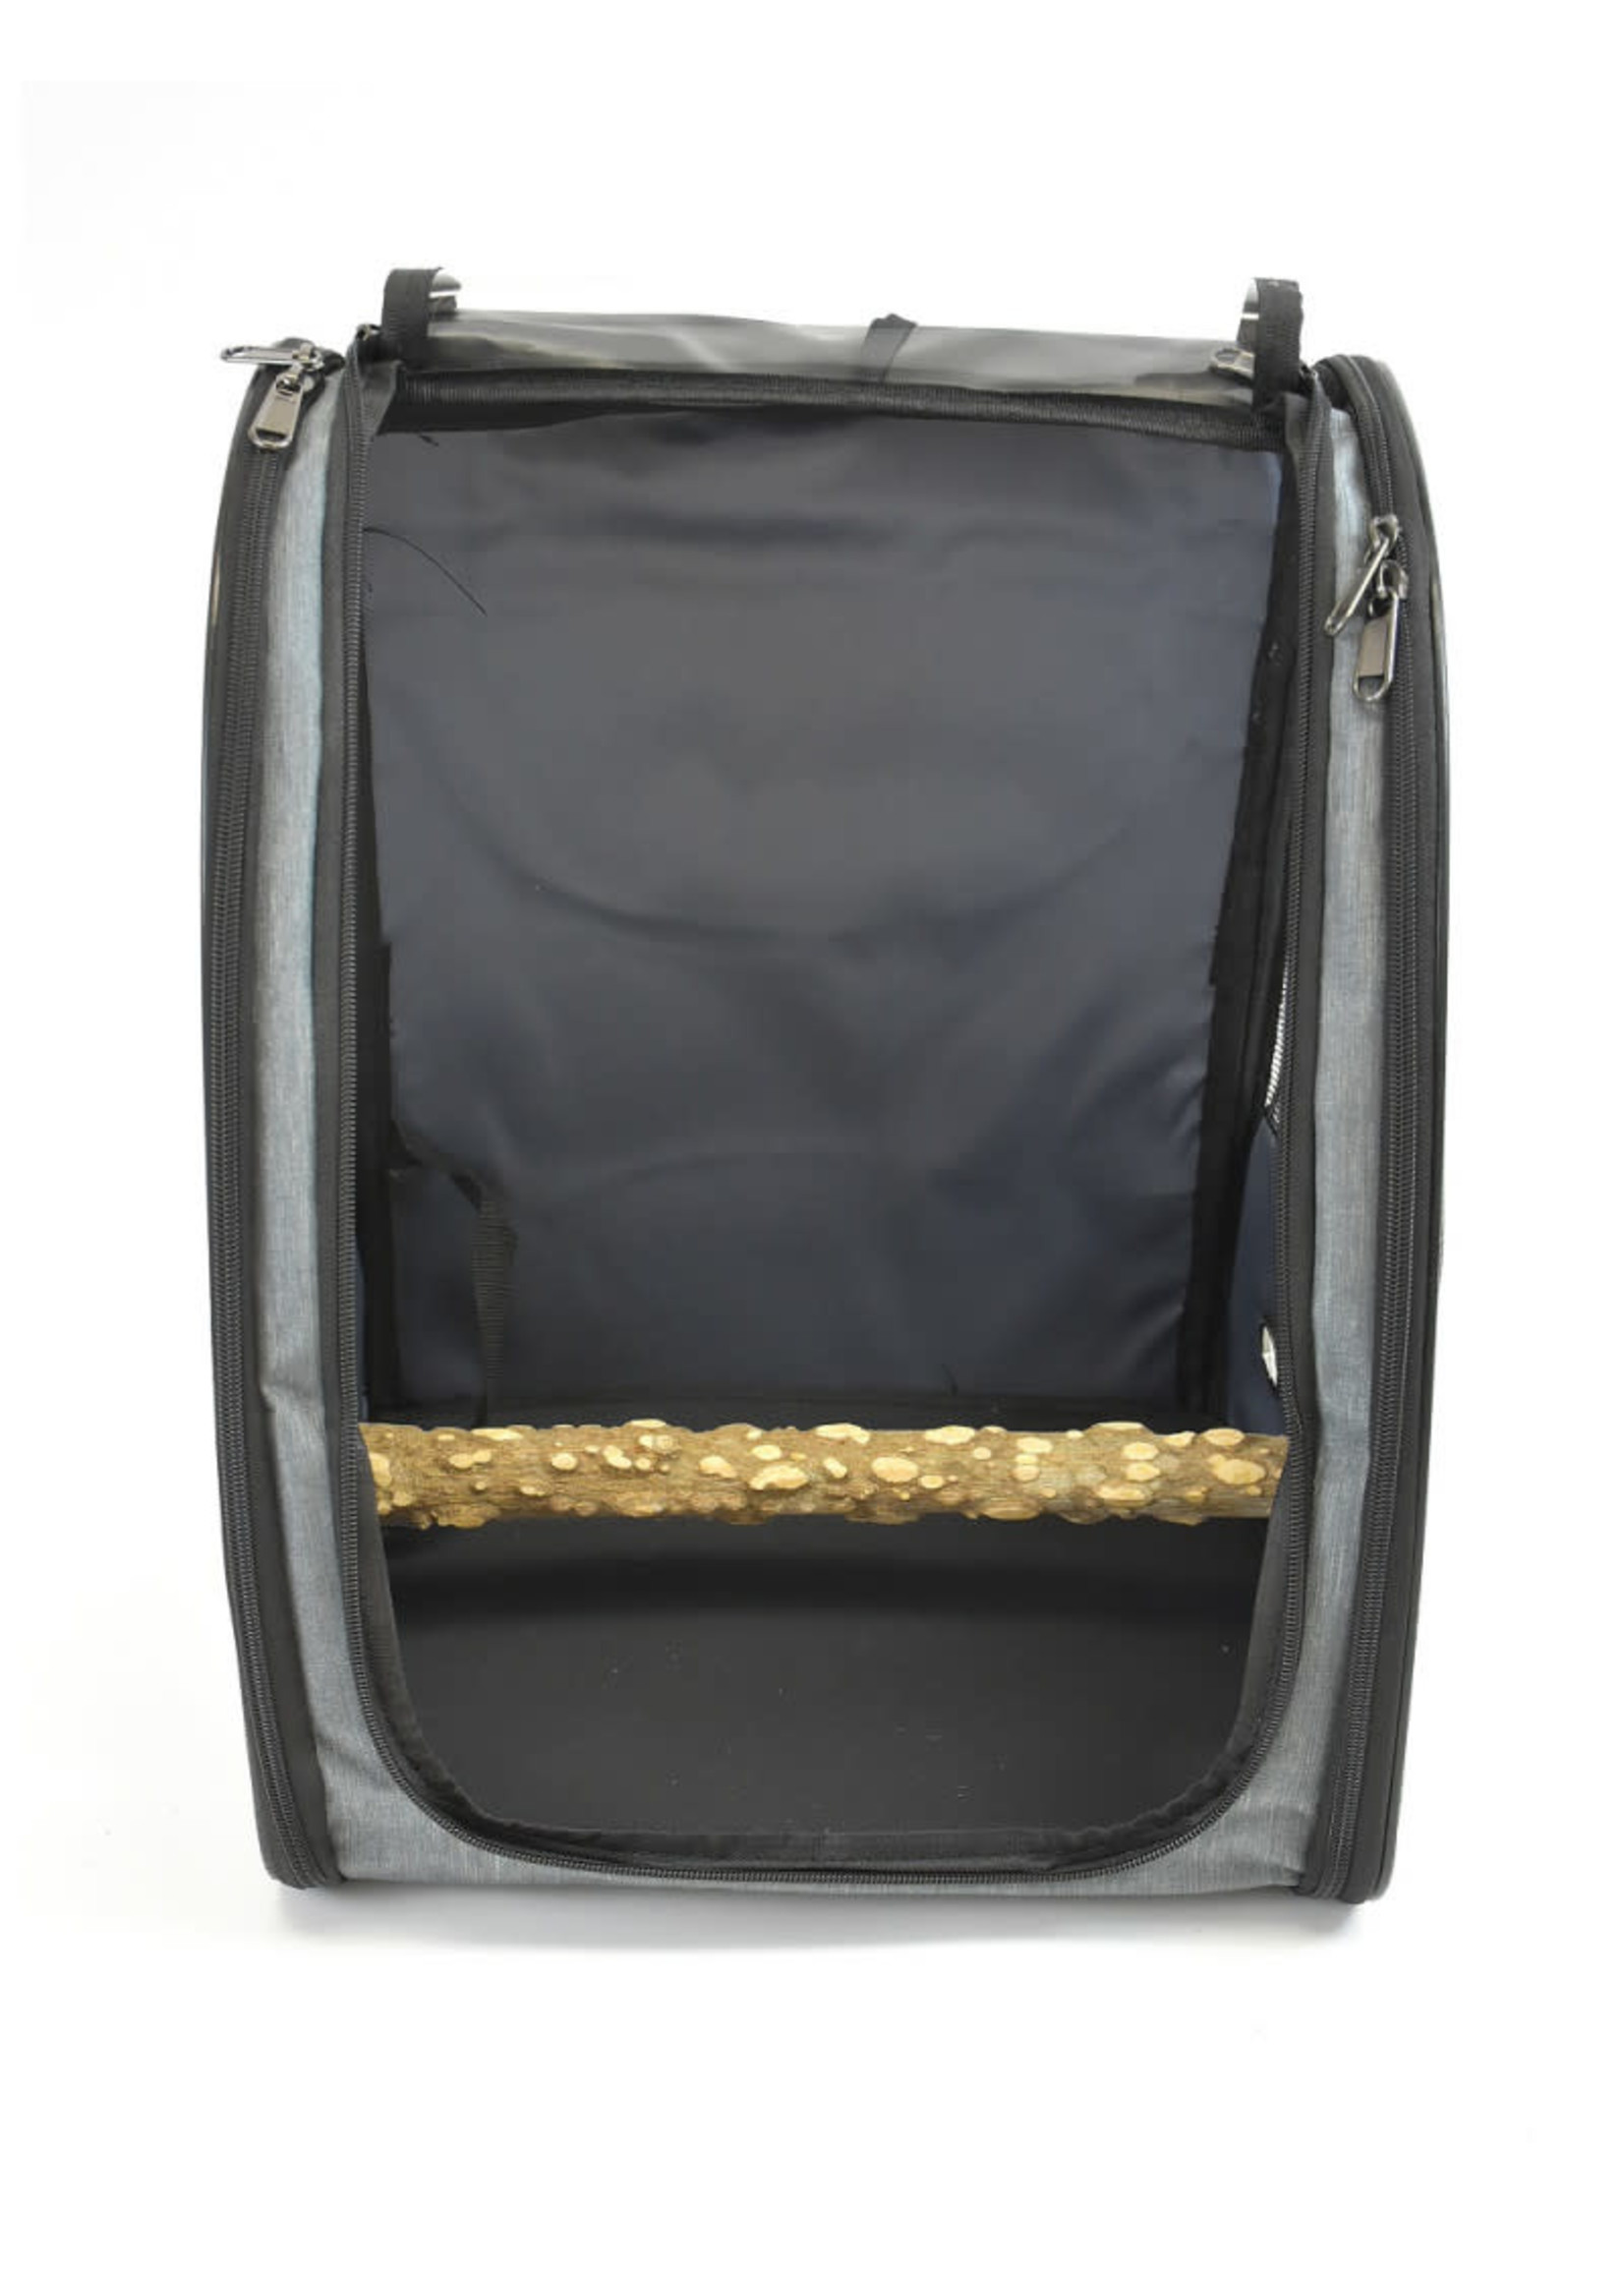 Jolly Jungle Jolly Jungle Fabric Backpack Carrier Black